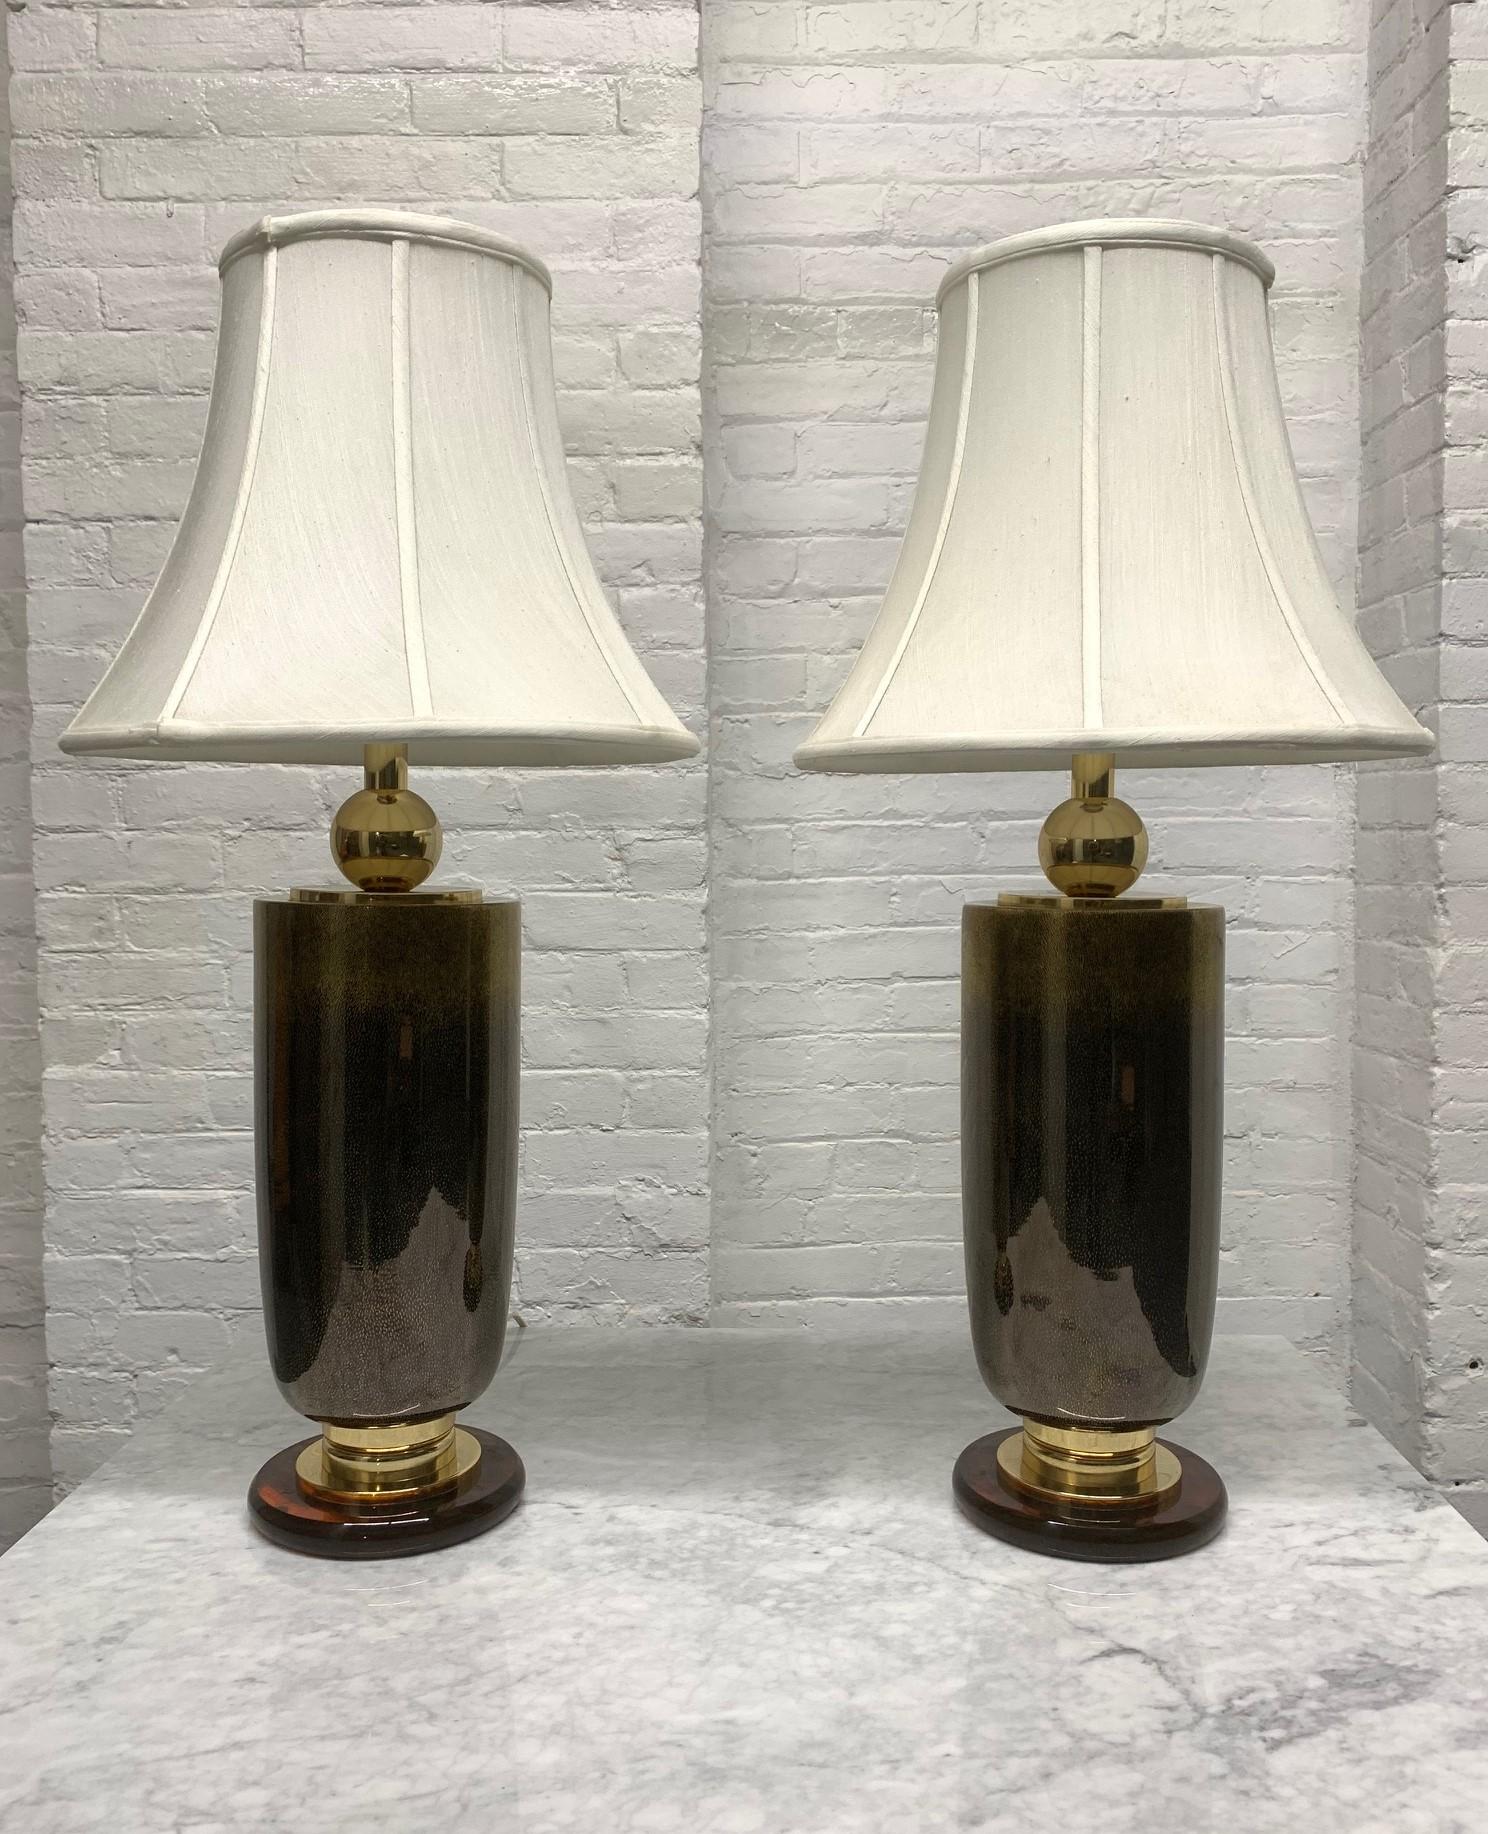 Pair of Italian glass lamps. Lamps are brass, well designed with a nice brown glass color. Also has a Bakelite base.
Shades not included.